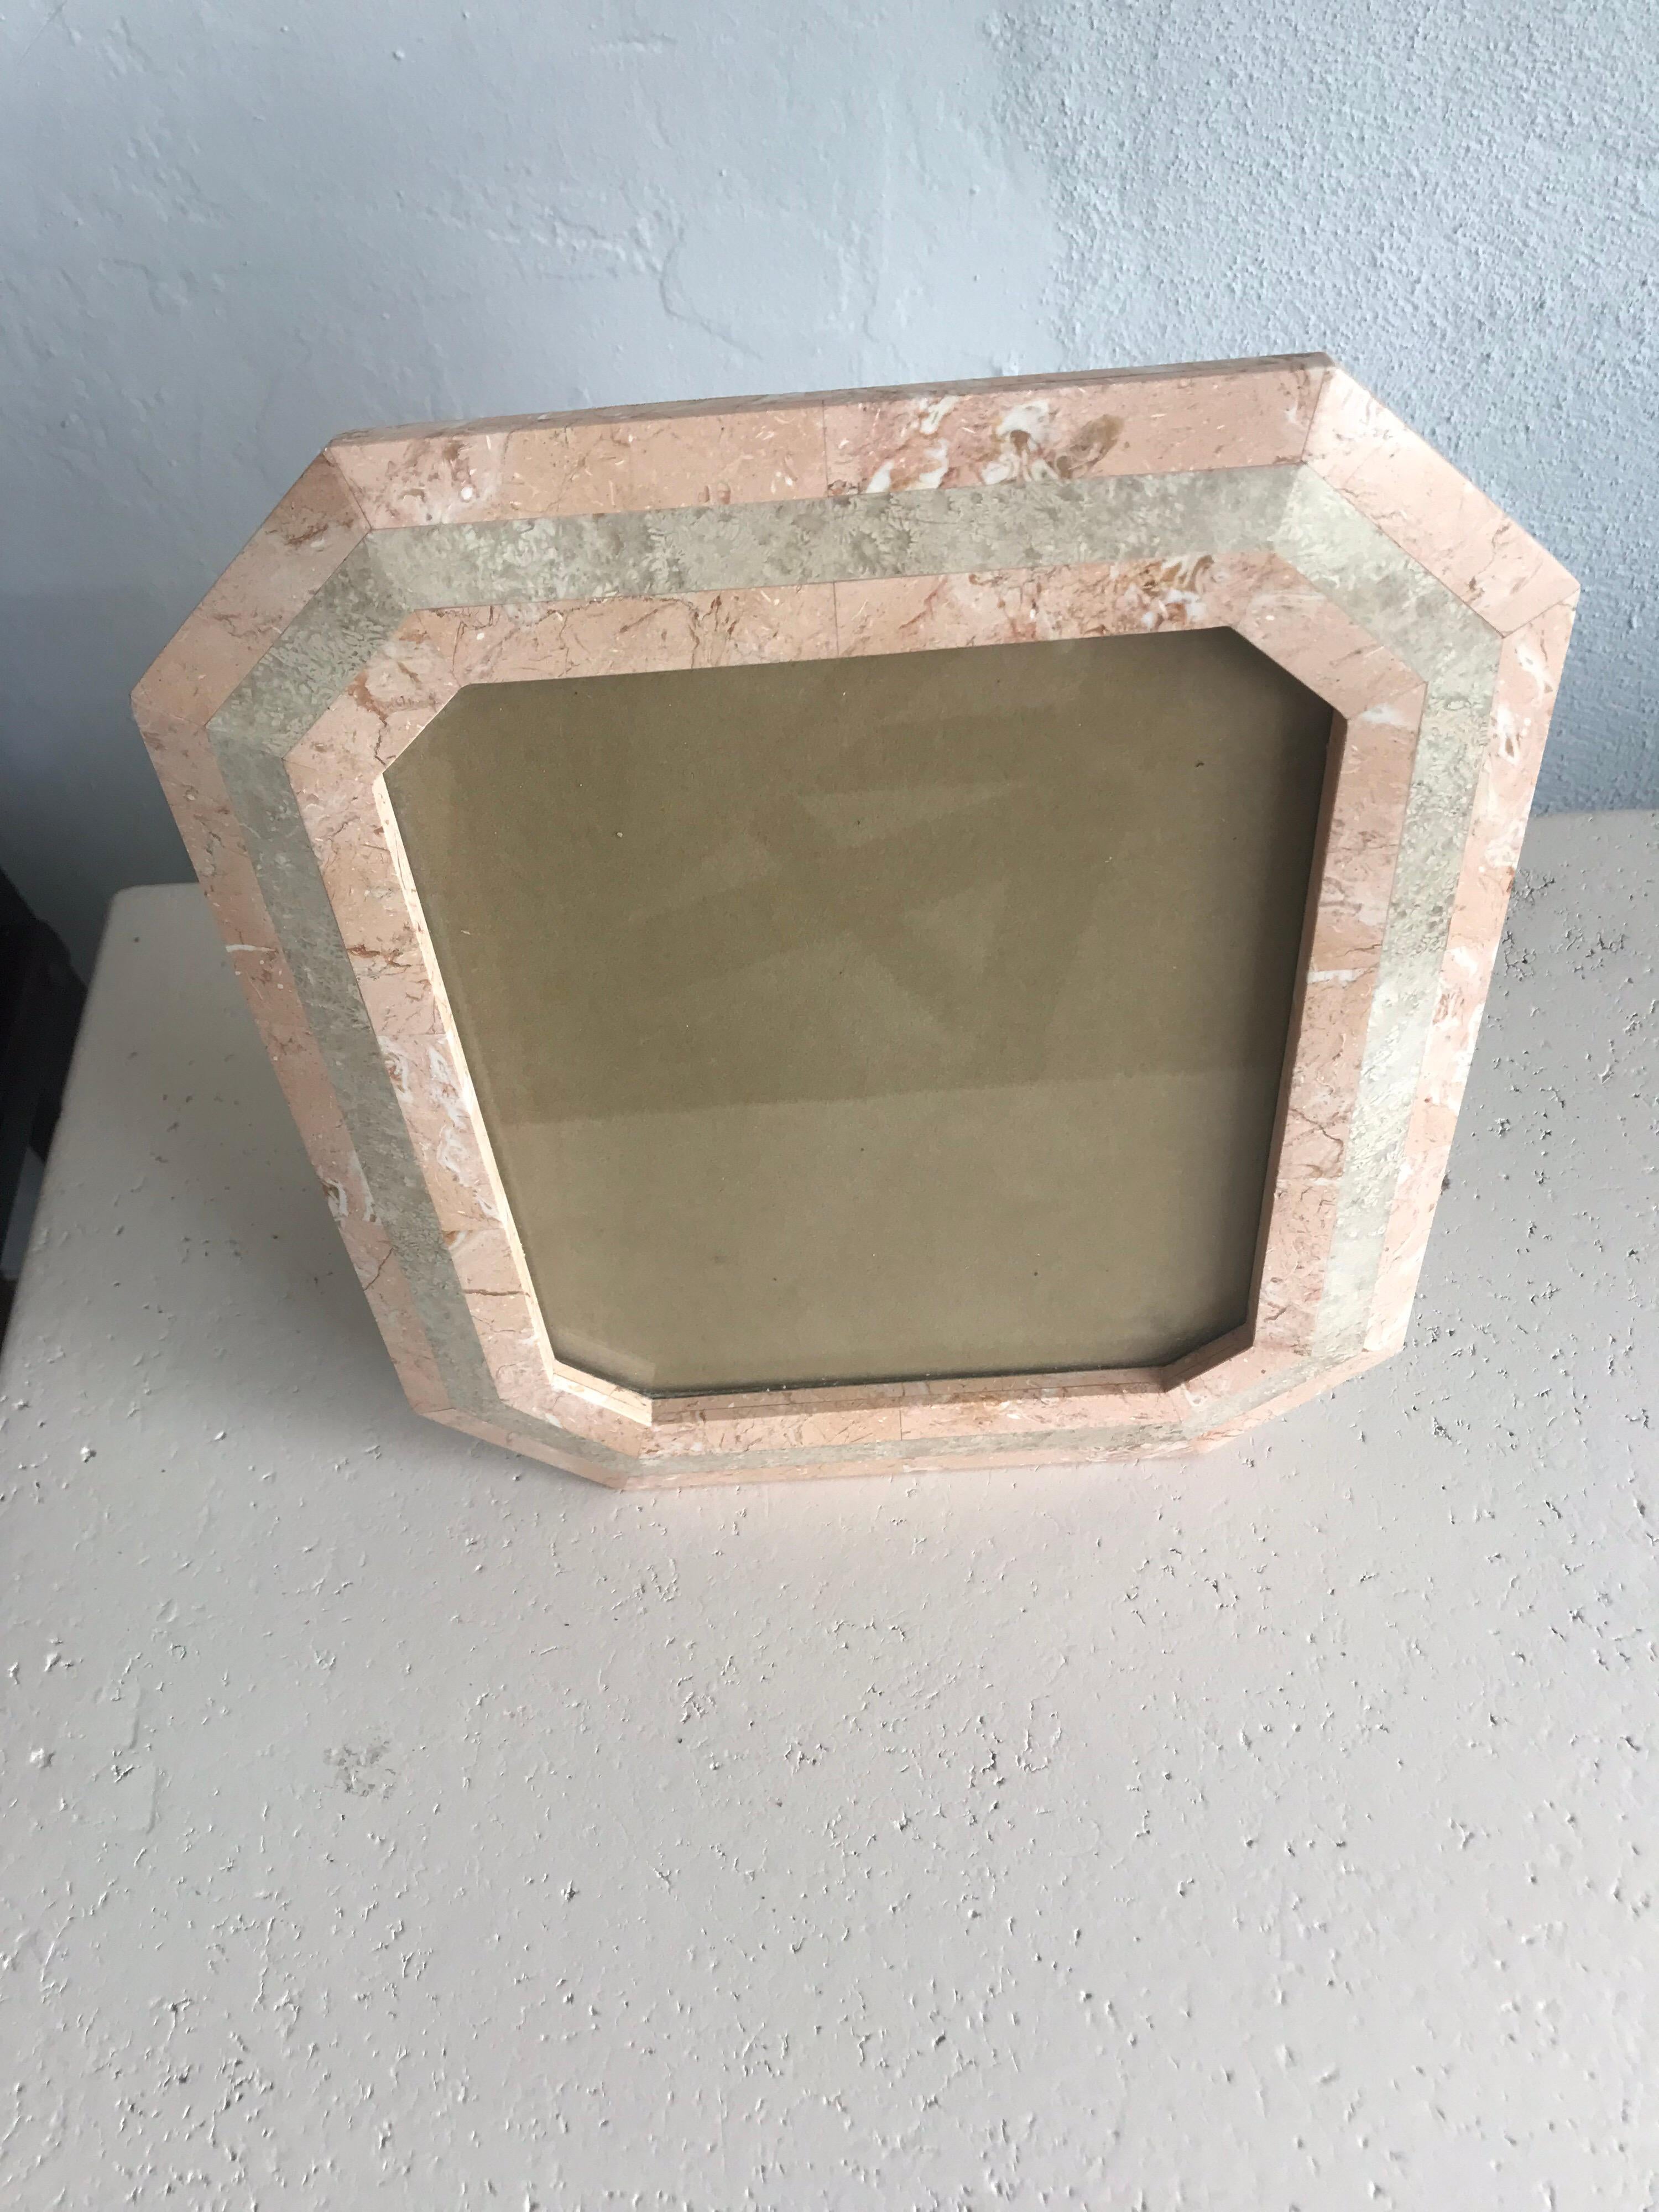 Picture or photo frame rendered in tessellated marble, stone, travertine, by Maitland Smith, 1980s

Fits an 8x10 photo.